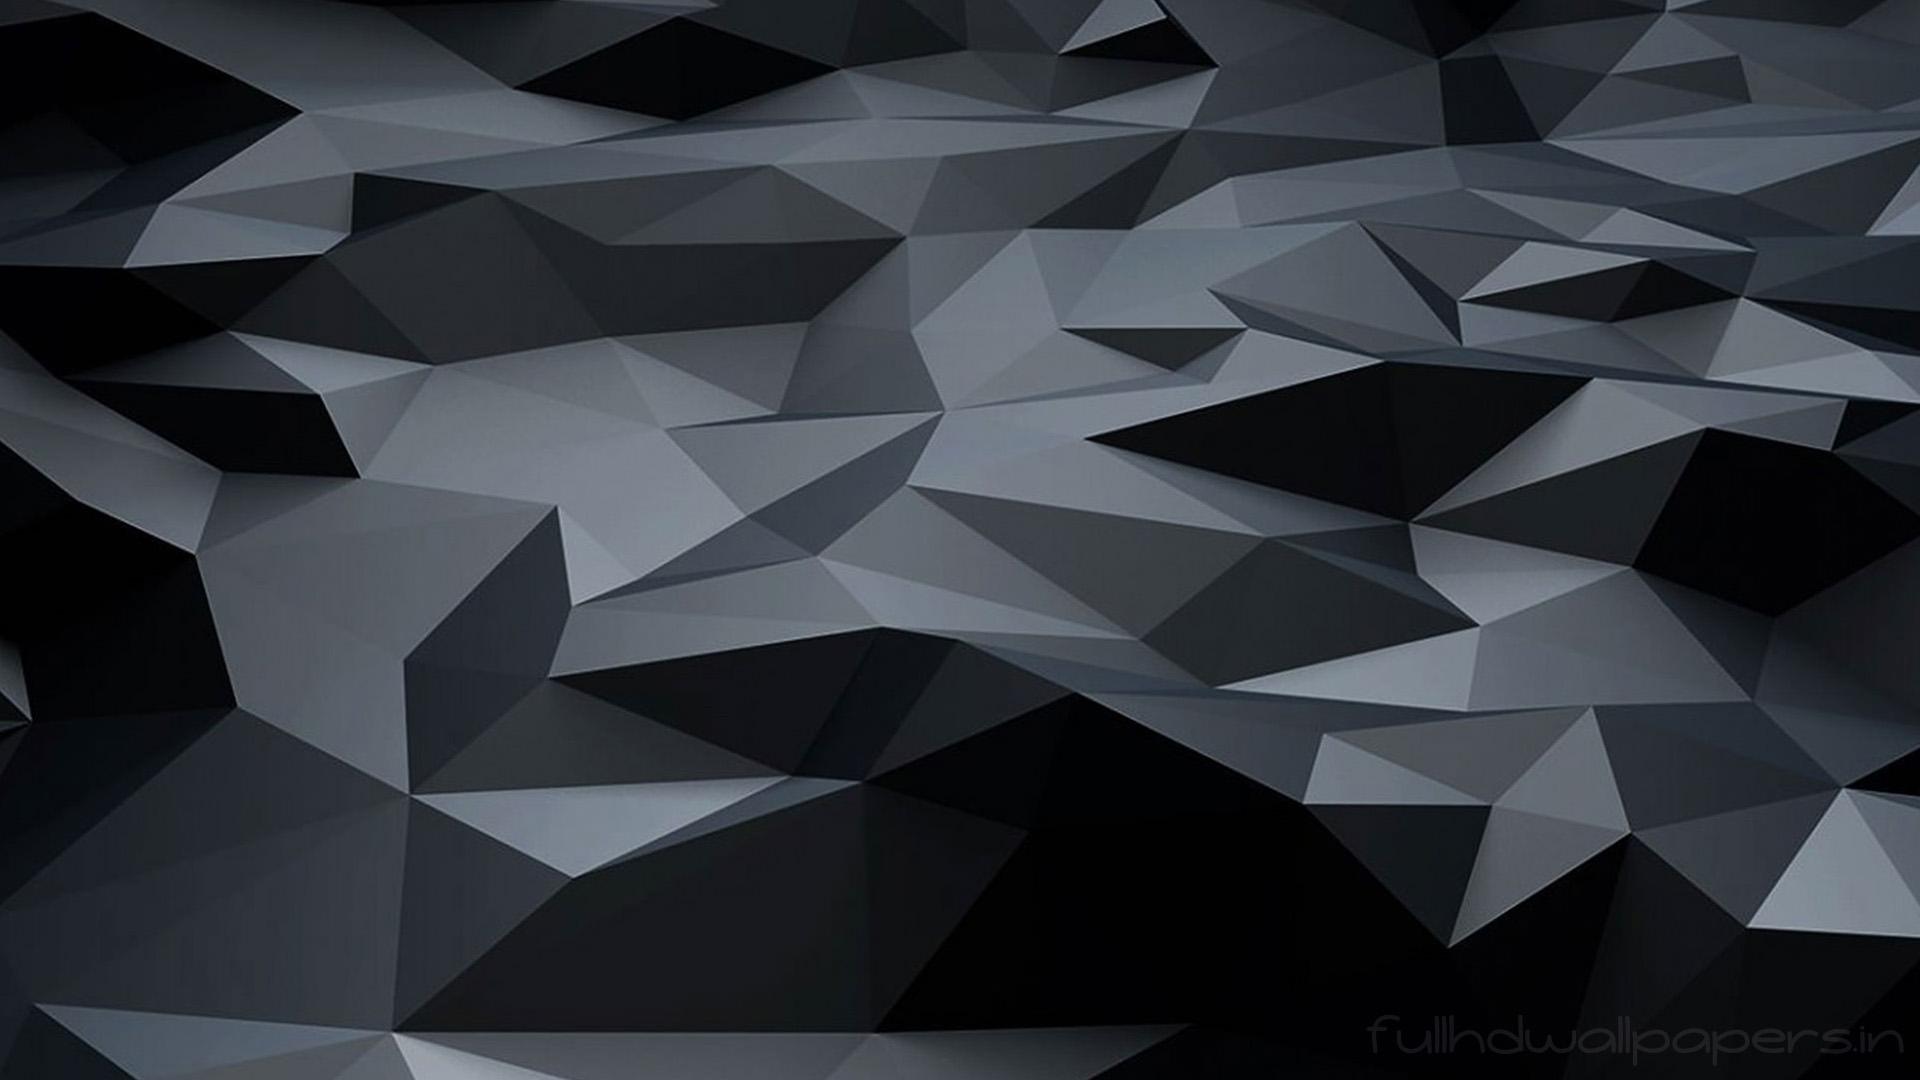  Black  Triangle  Wallpapers  Top Free Black  Triangle  